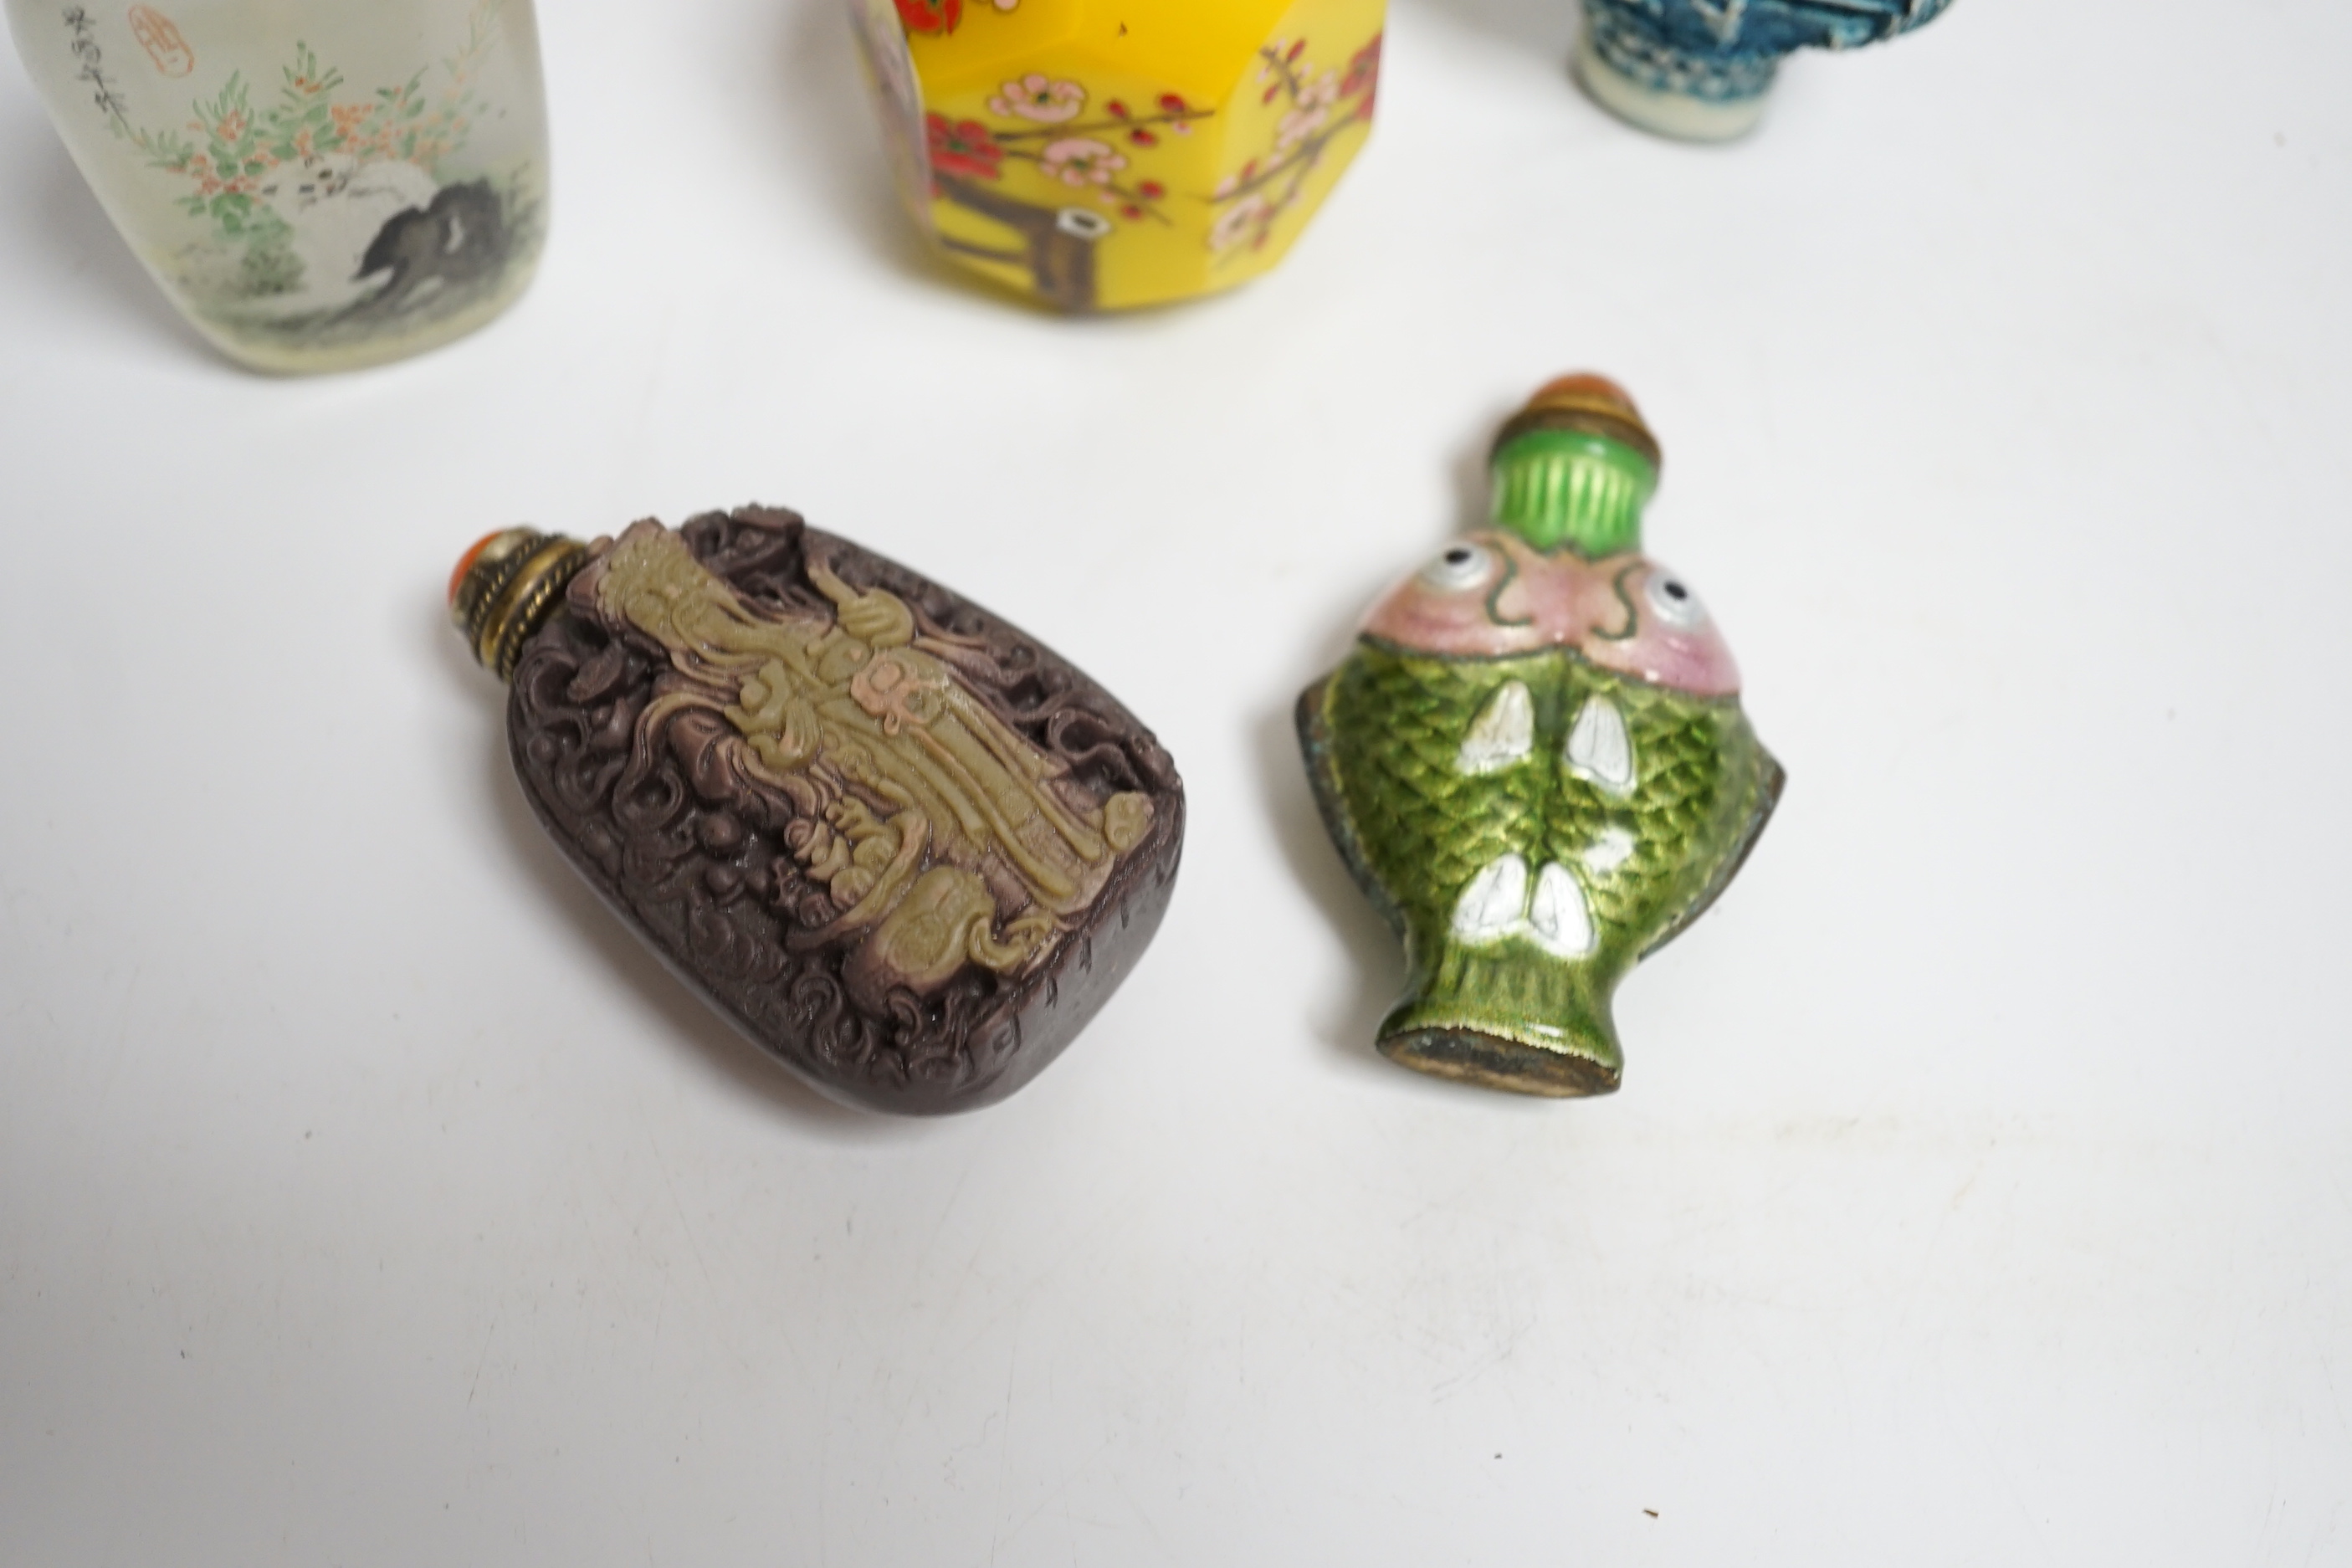 Seven various Chinese snuff bottles to include enamel, resin, agate, ceramic and glass